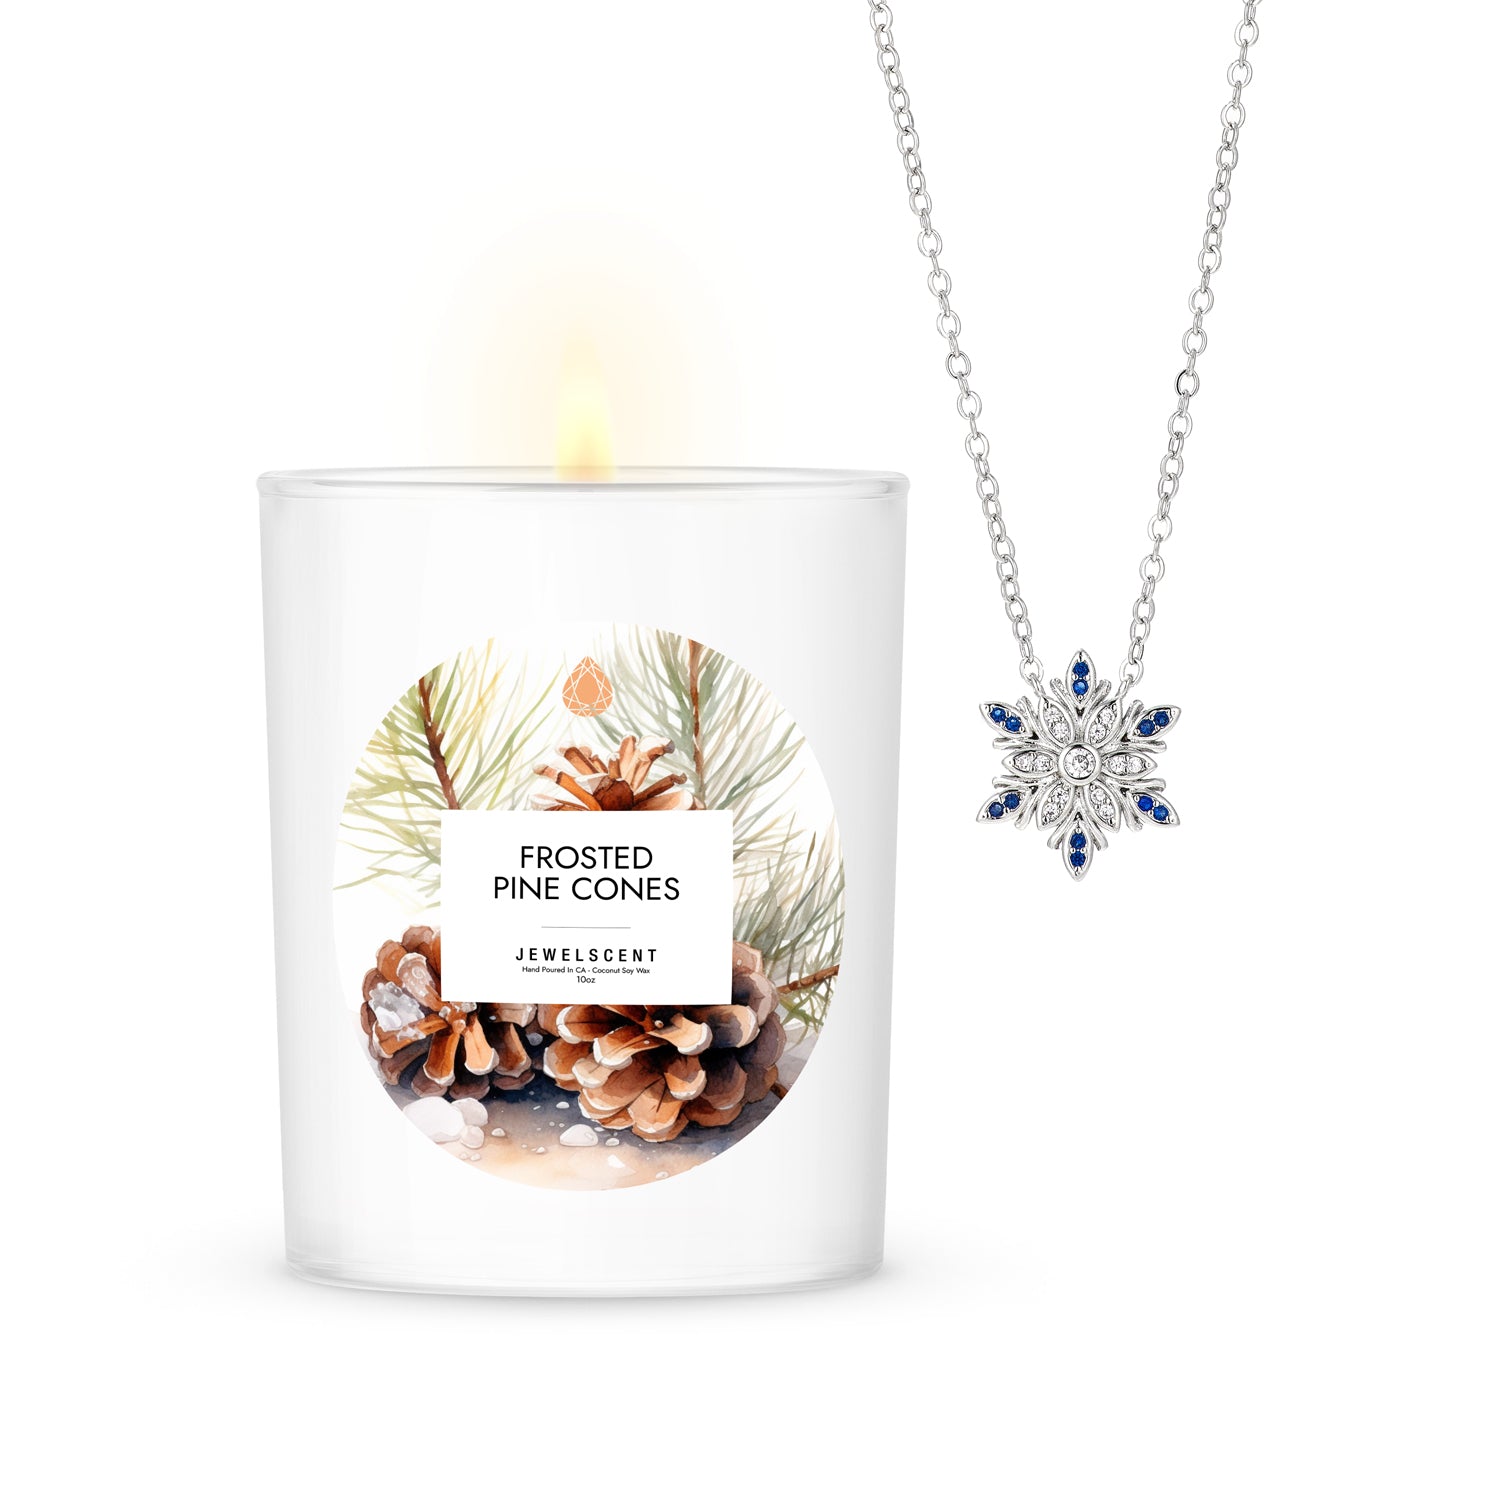 Frosted Pine Cones 10oz Signature Jewelry Candle – JewelScent